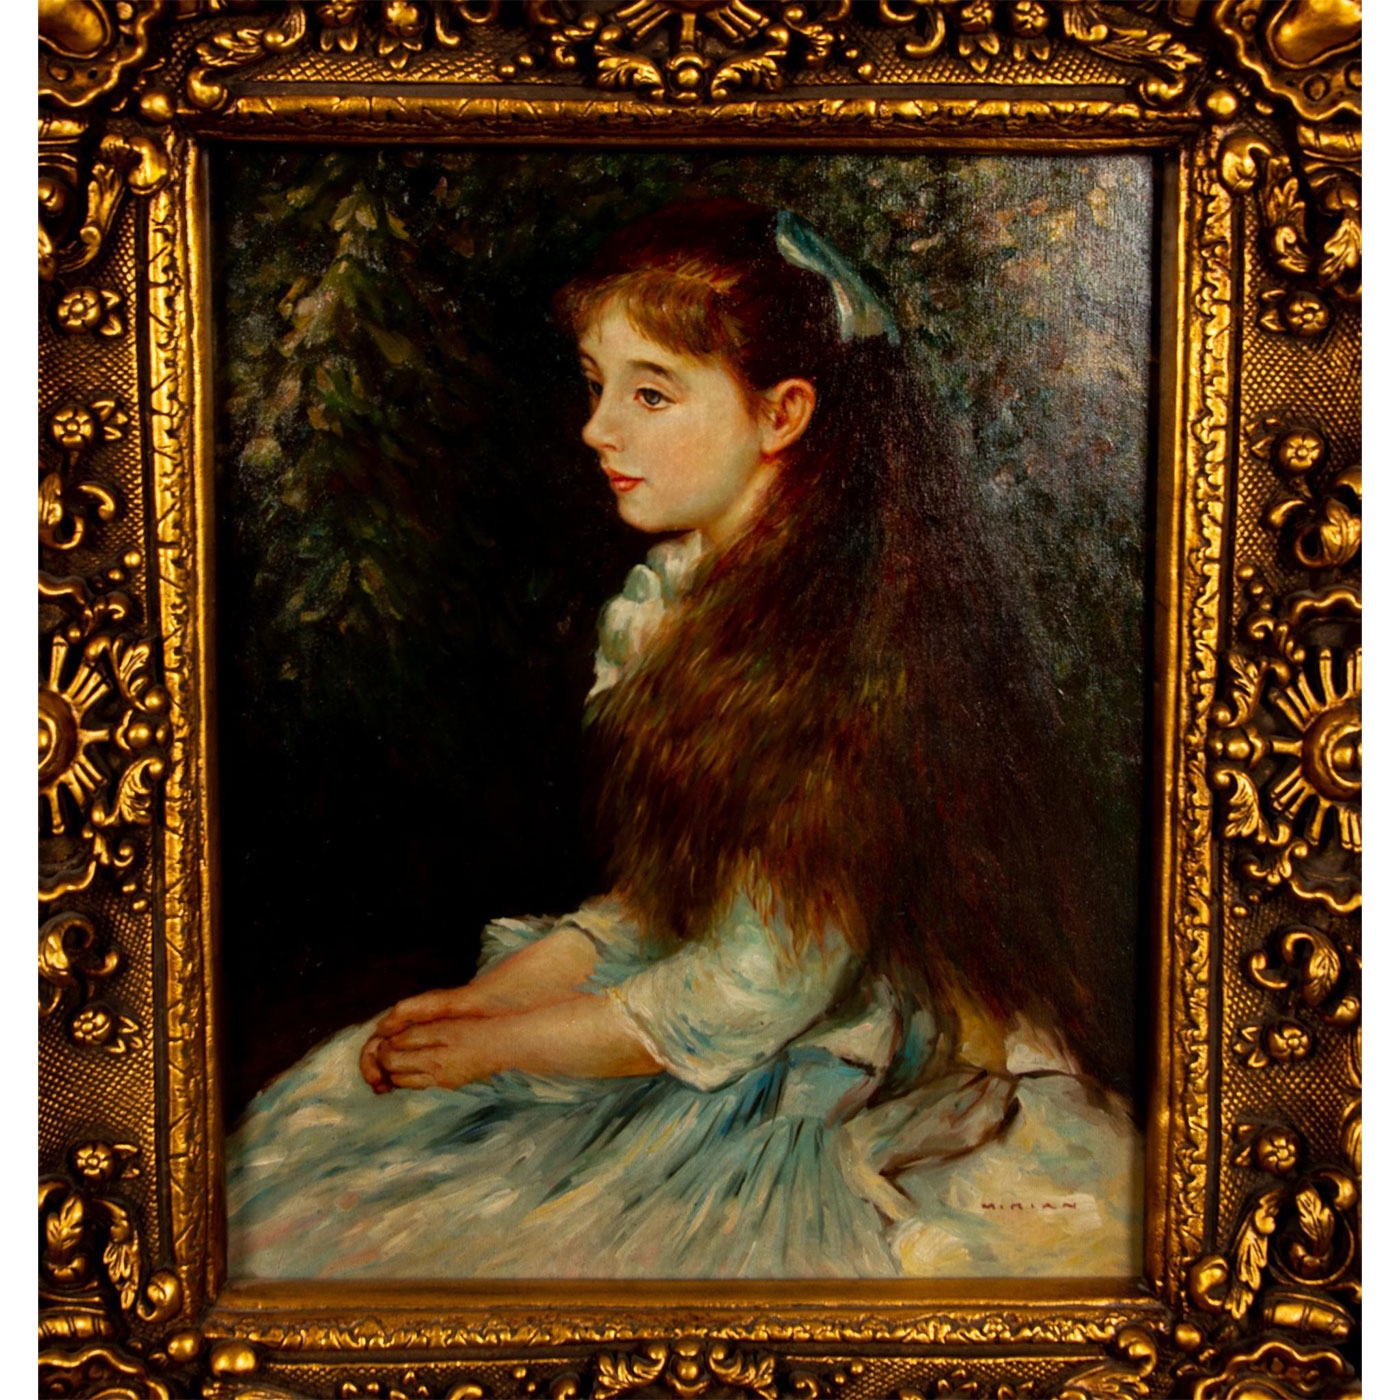 Artwork by Pierre-Auguste Renoir, Inspired by 'Portrait of Irene Cahen d'Anvers' by Renoir, Made of Oil Painting on Canvas